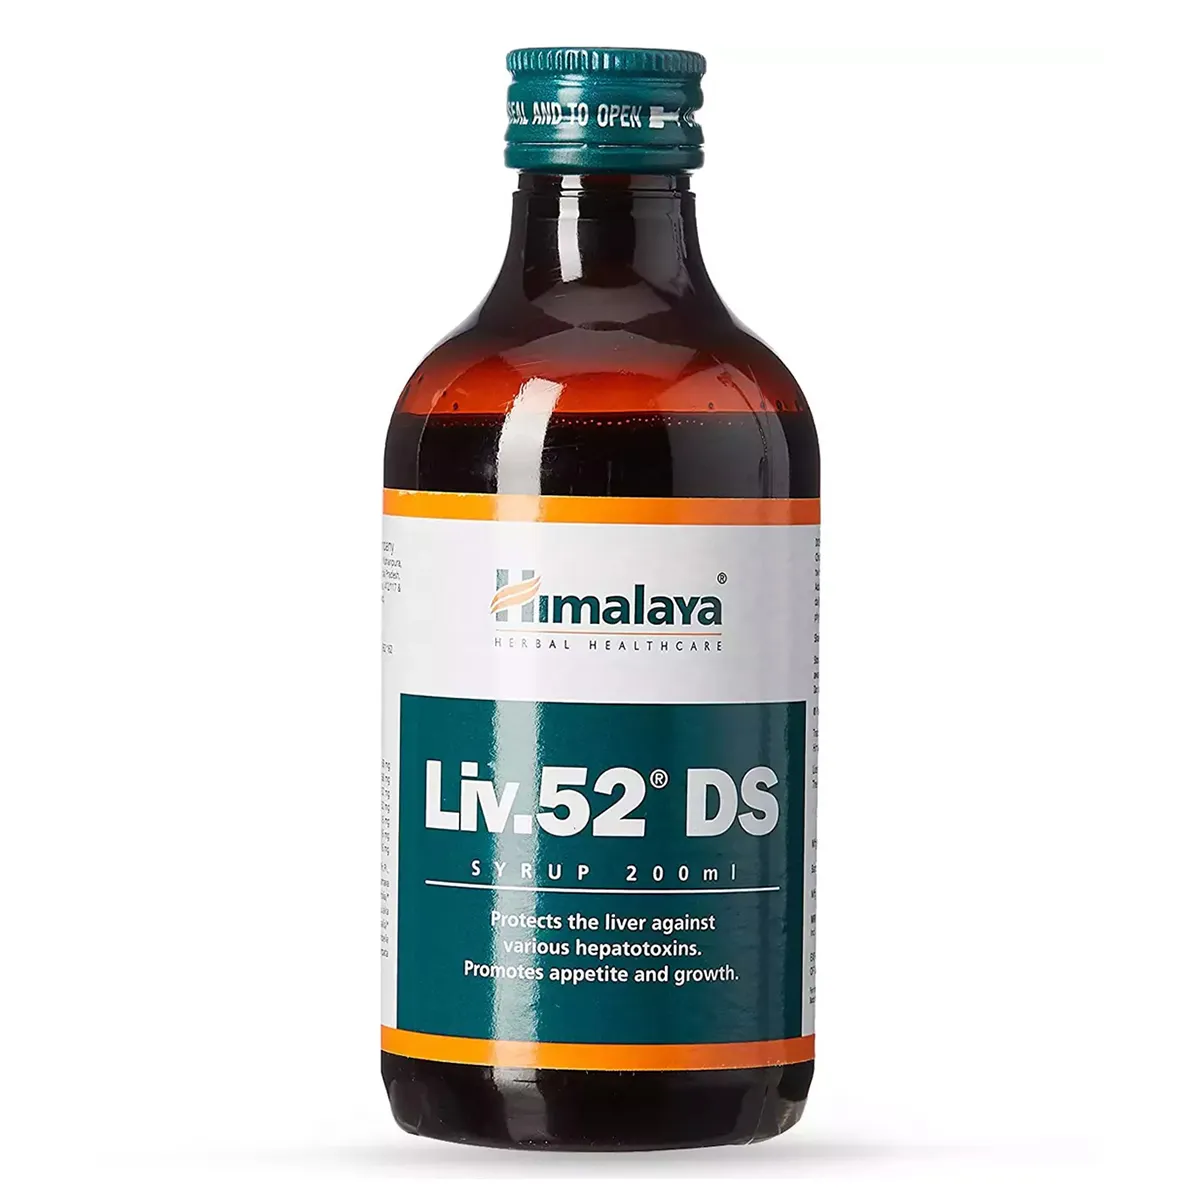 Himalaya Liv.52 Ds Syrup, 200 ml Price, Uses, Side Effects